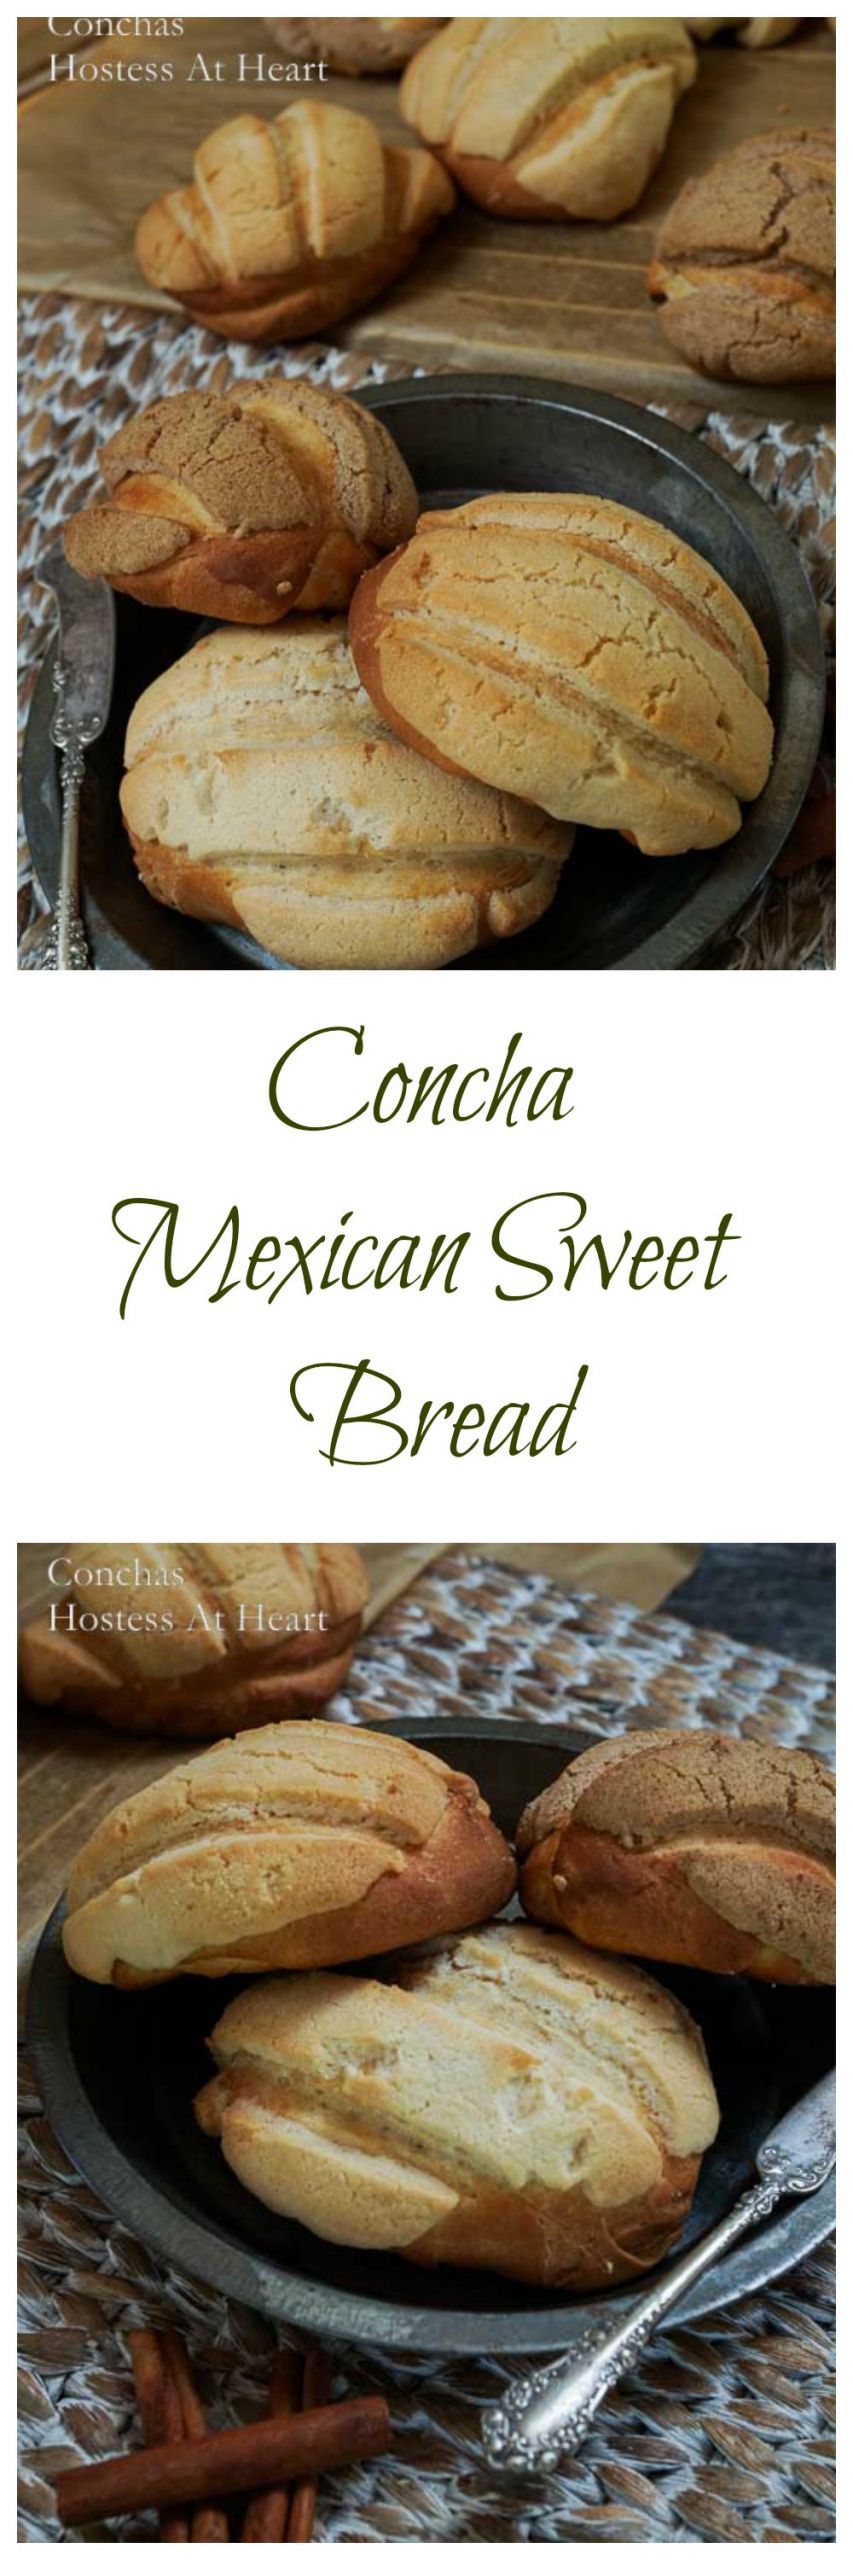 Mexican Sweet Bread Recipes
 Conchas Mexican Sweet Bread Recipe